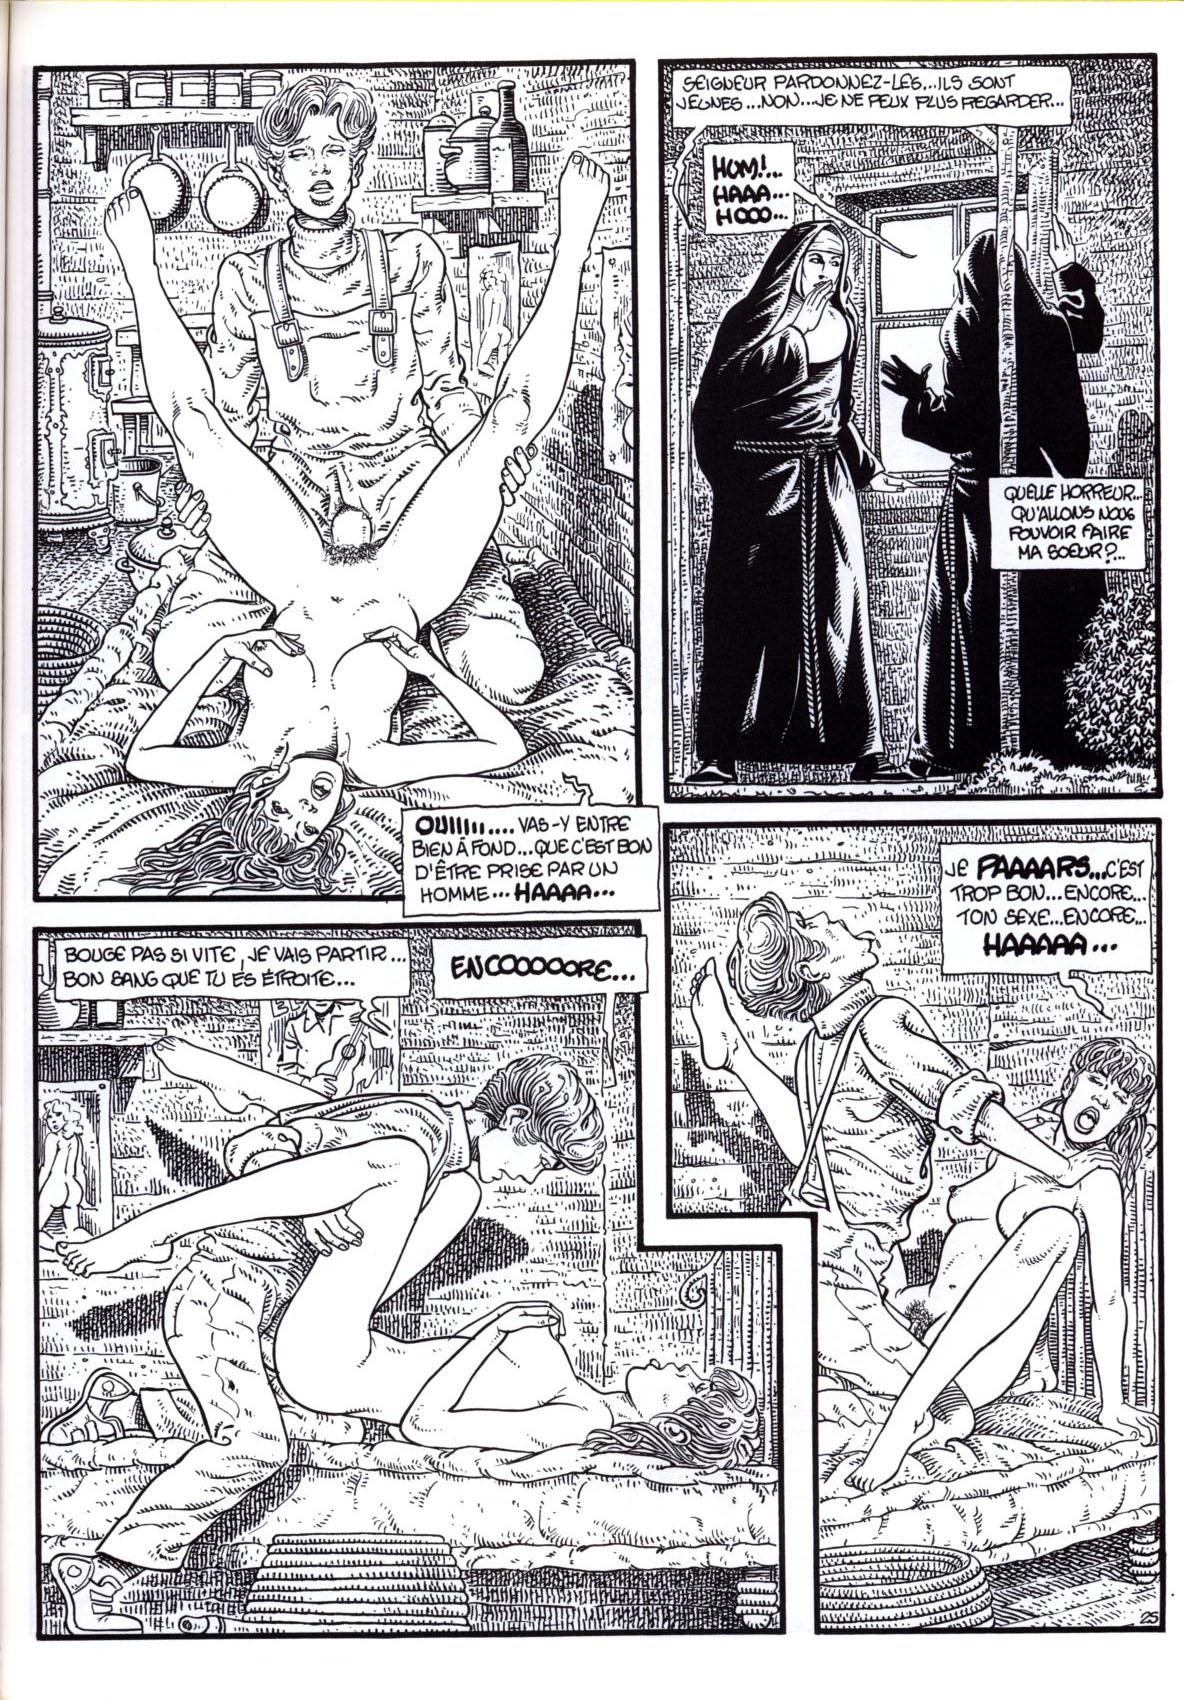 The Mary Magdalene Boarding School - Volume 3 numero d'image 27